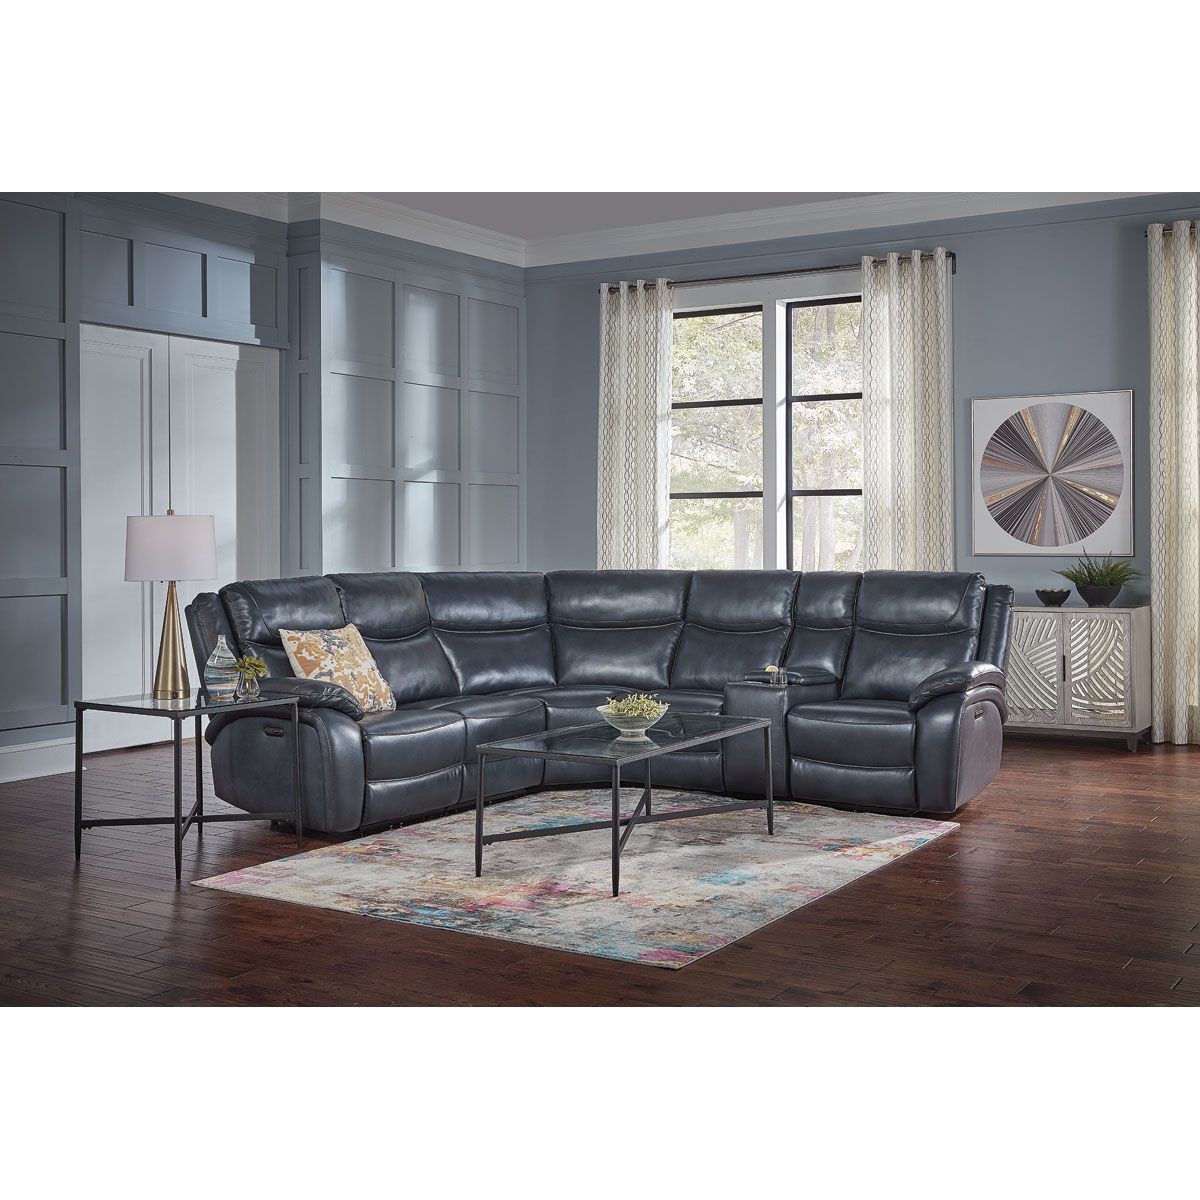 Picture of LENNOX LEATHER 6PC TRIPLE POWER RECLINING SECTIONAL